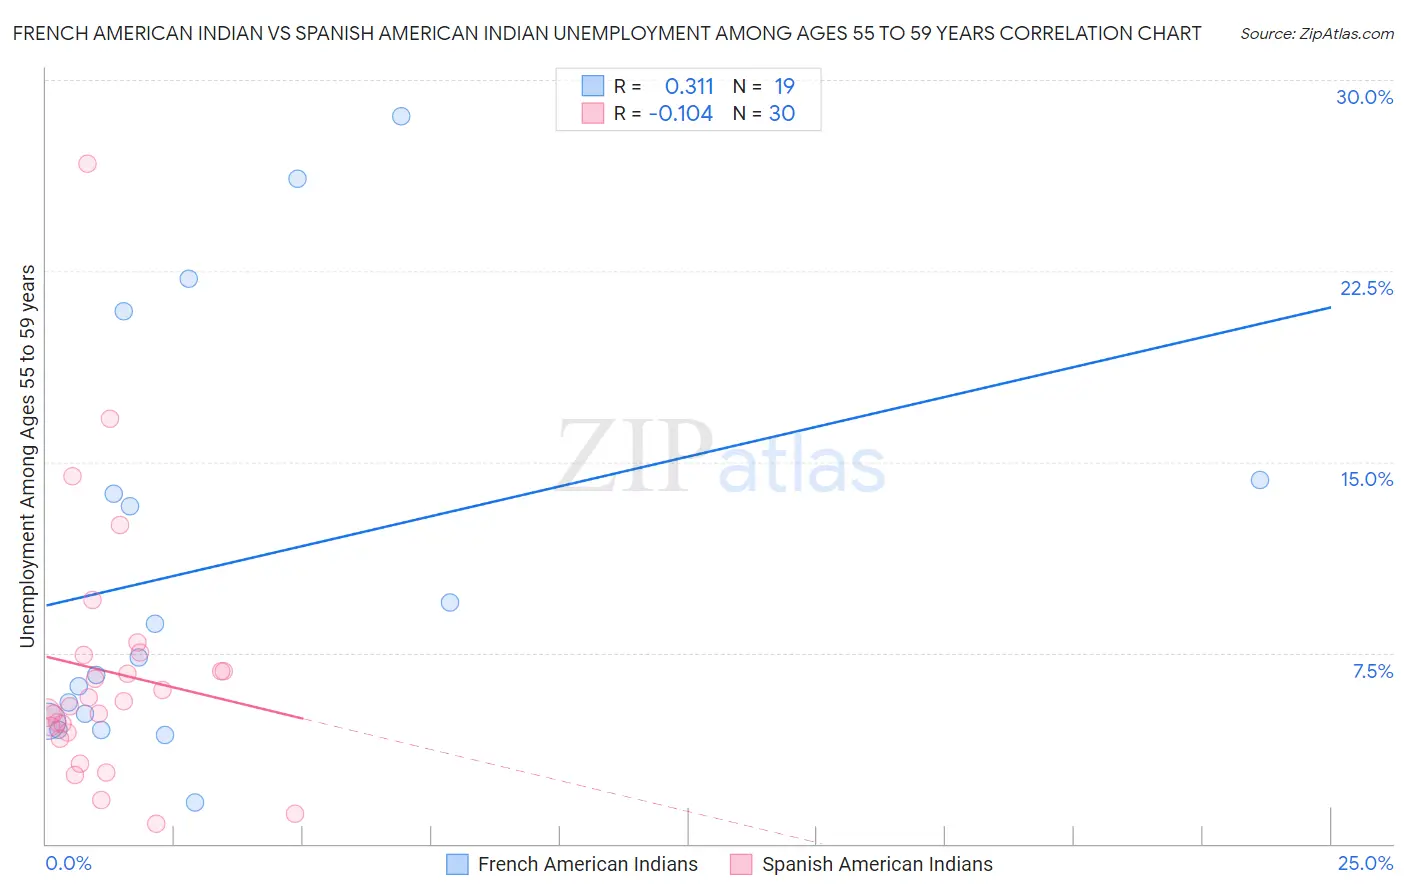 French American Indian vs Spanish American Indian Unemployment Among Ages 55 to 59 years